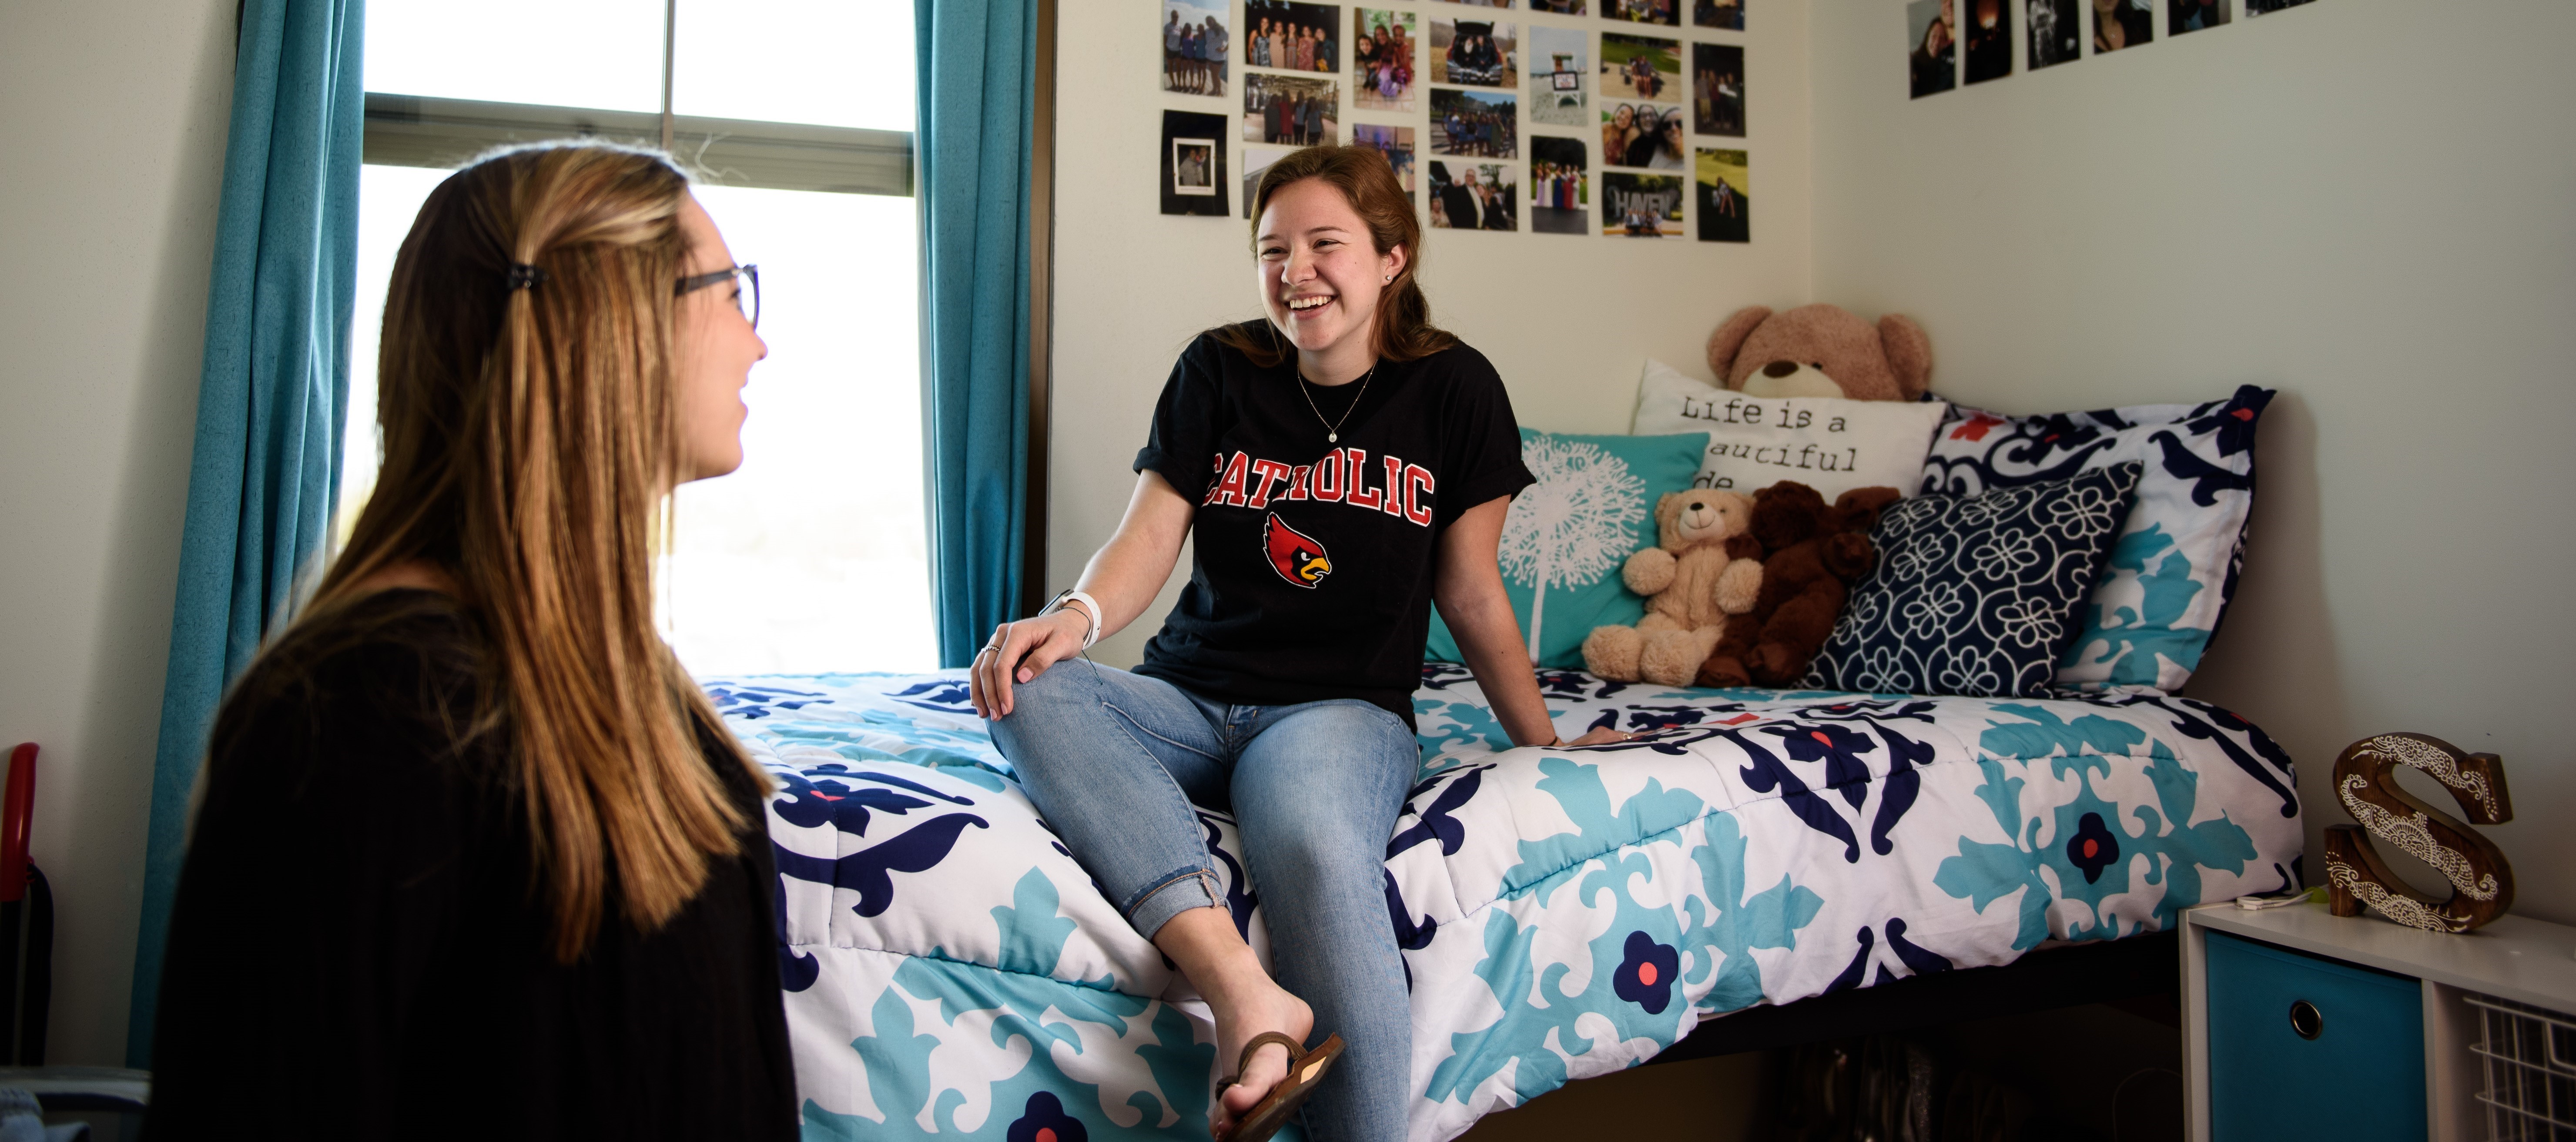 Female students laughing in dorm room